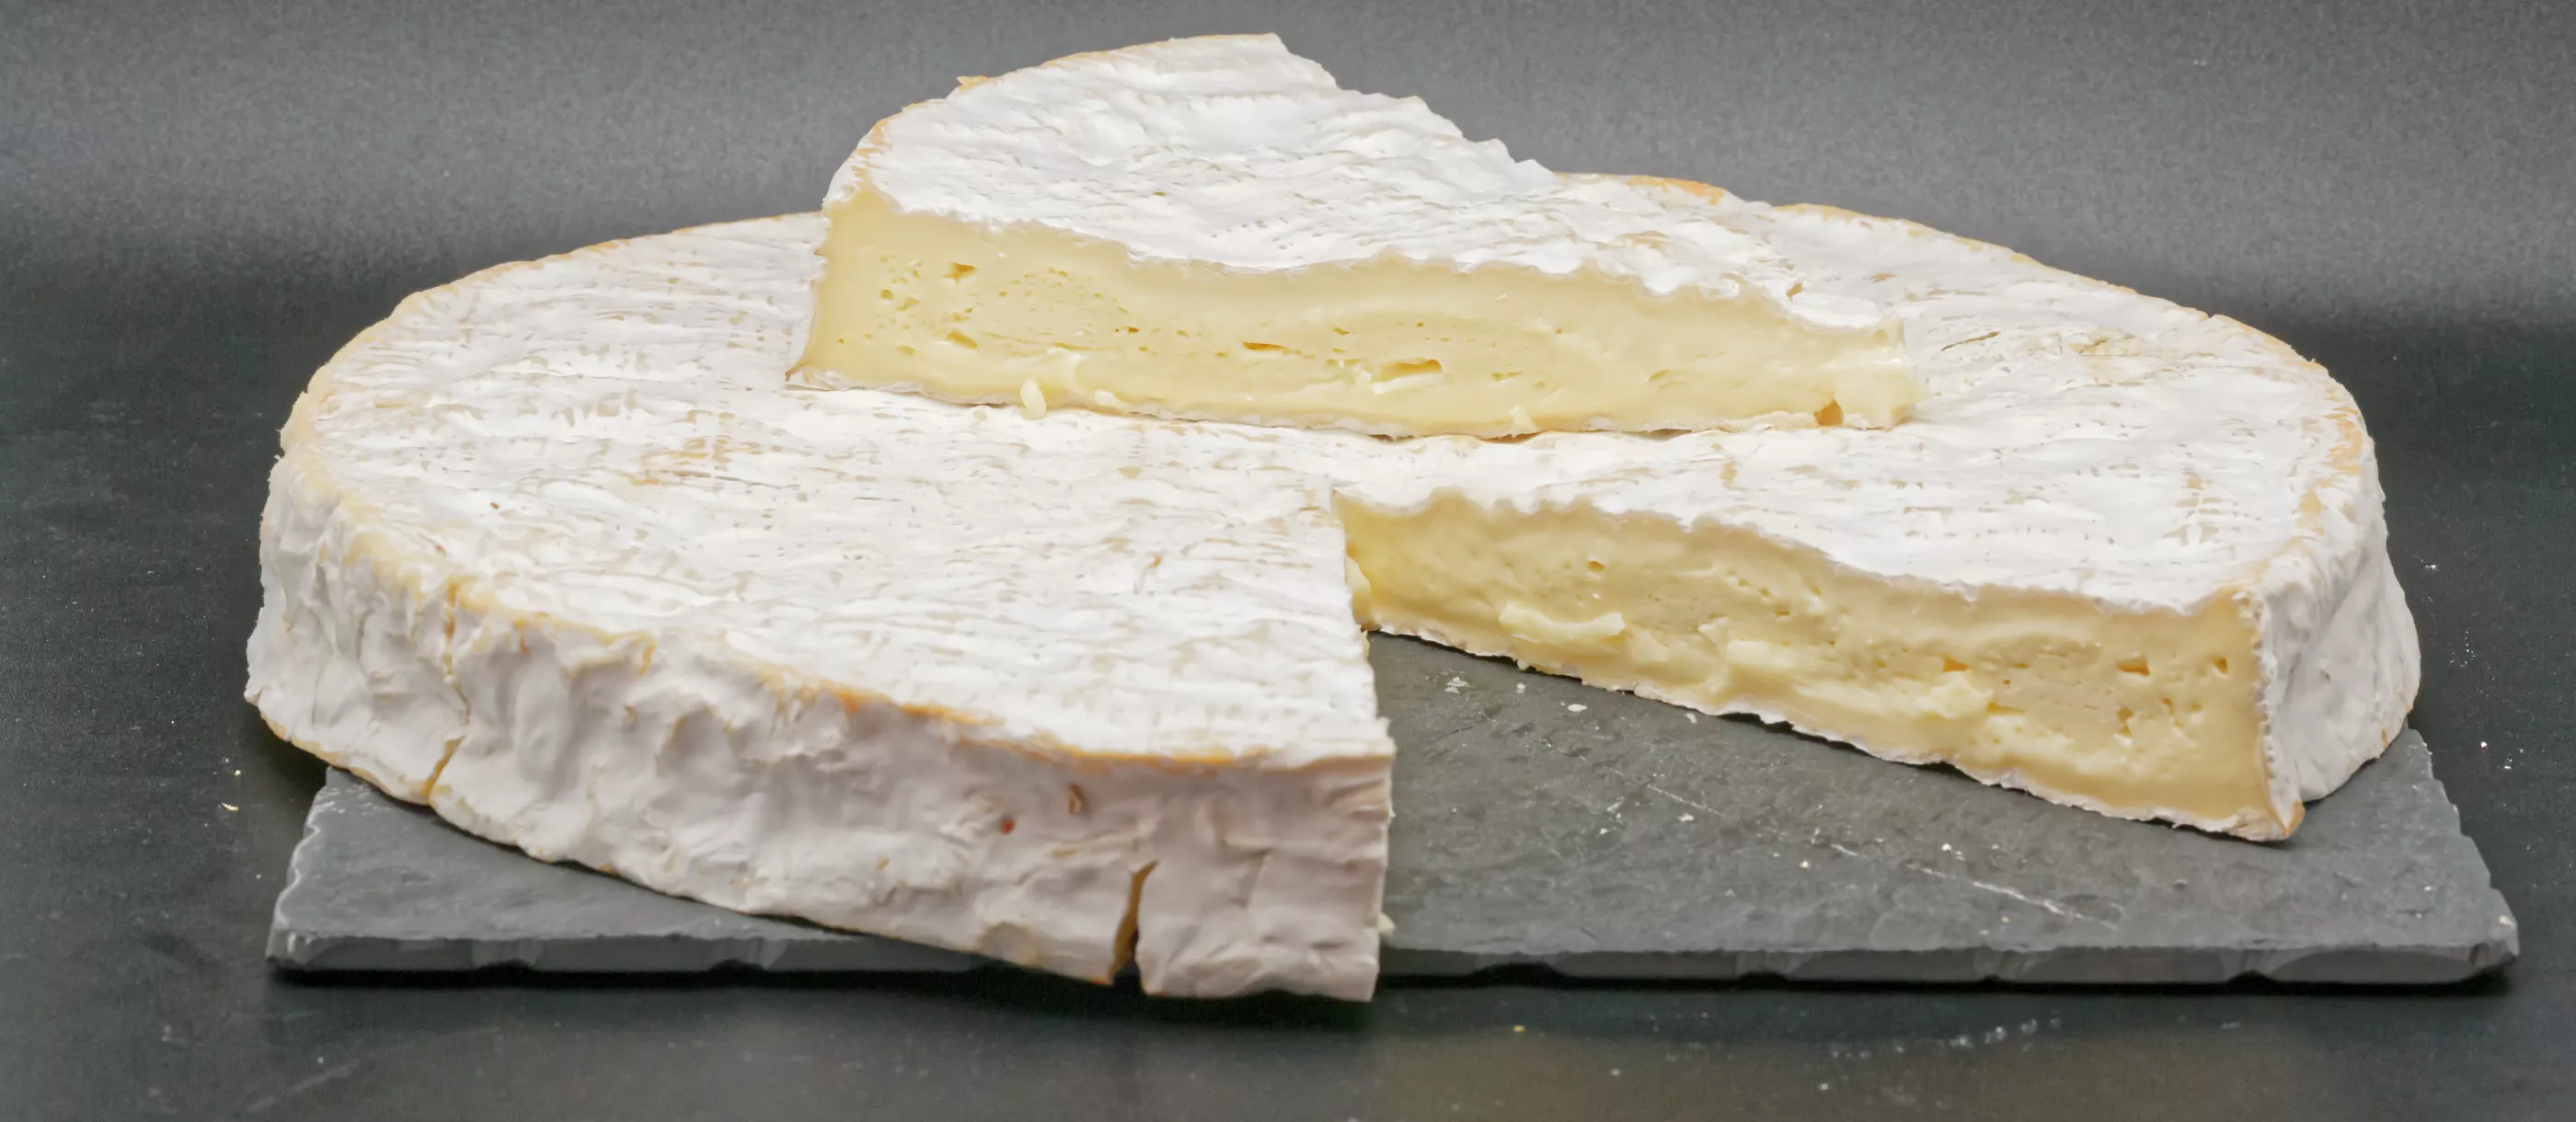 Le P'tit Fermier De Kervihan in France, Europe | Cheesemakers - Rated 0.8